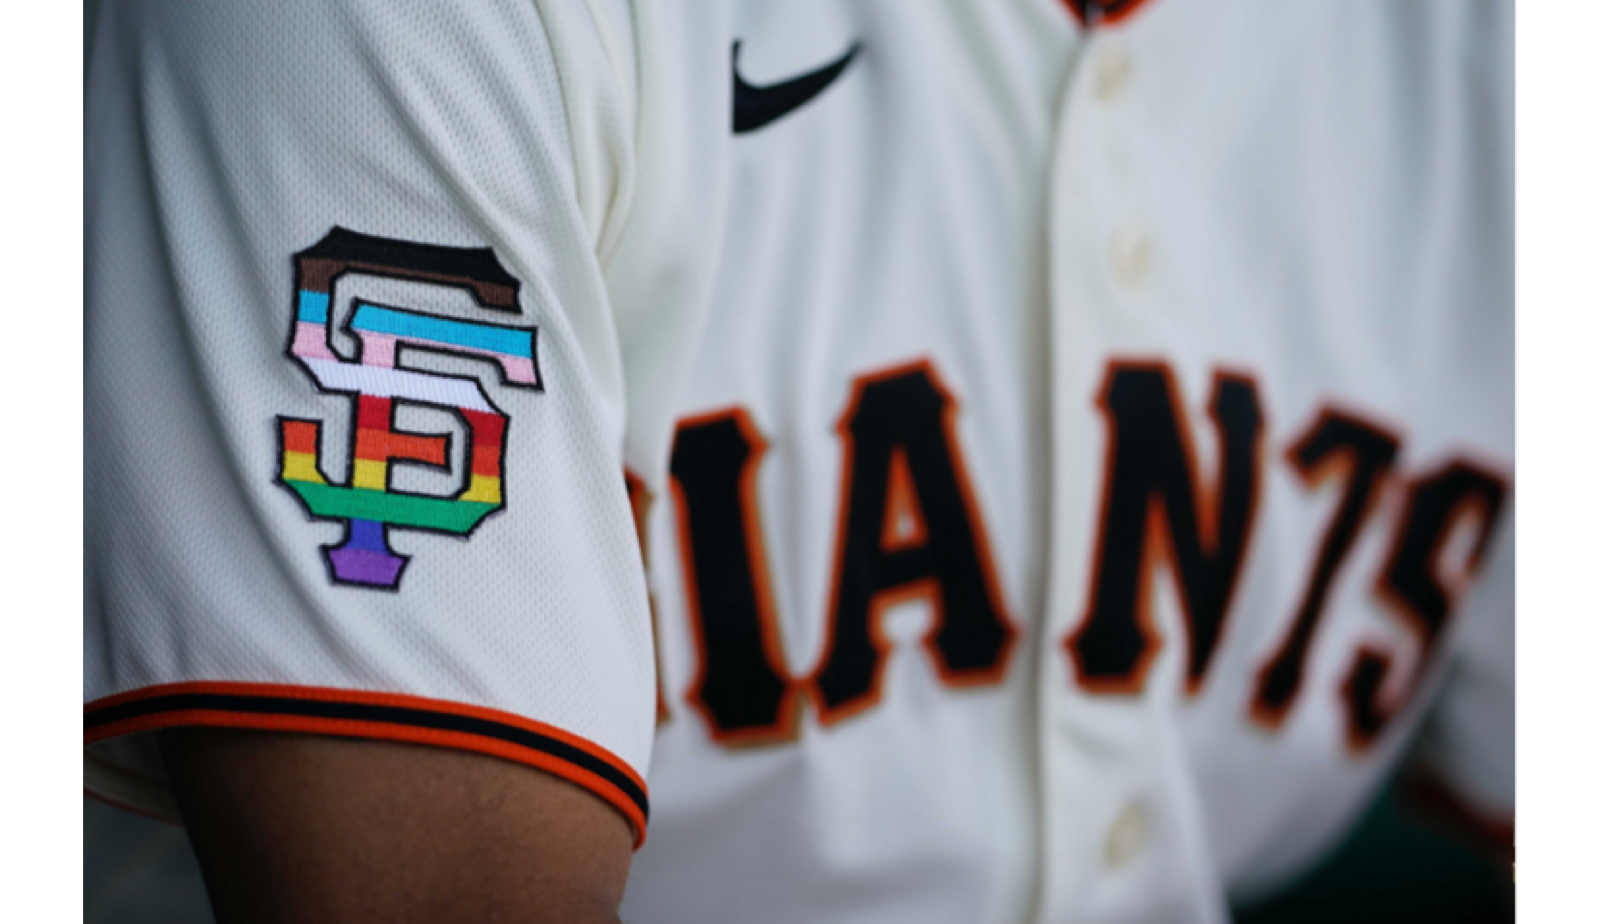 The San Francisco Giants jersey with the Pride-colored logo on the sleeve.